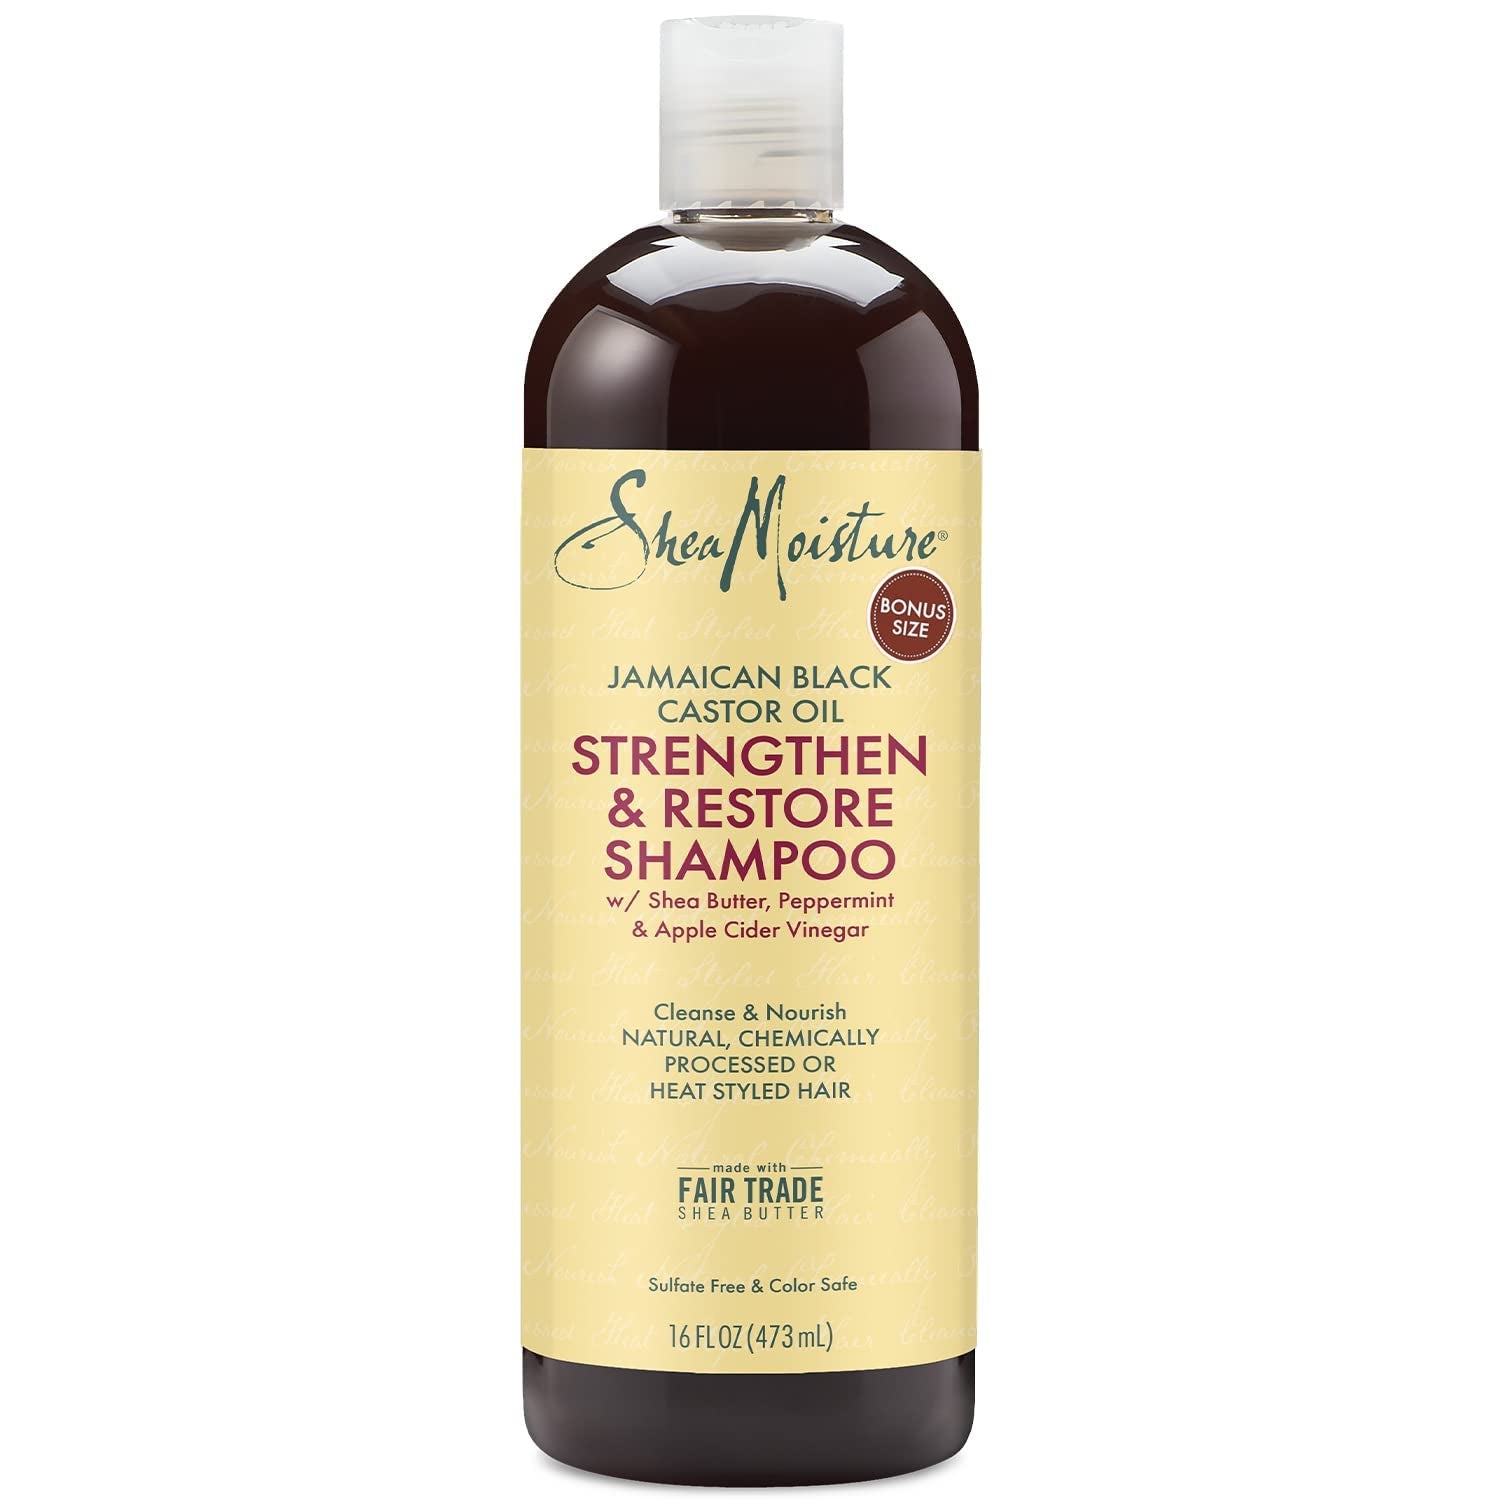 Sheamoisture Jamaican Black Castor Oil Strengthen & Restore Shampoo, Shea Butter, Peppermint & Apple Cider Vinegar, Sulfate Free, Chemically Processed Hair, Family Size (2 Pack -16 Fl Oz Ea) - Free & Fast Delivery